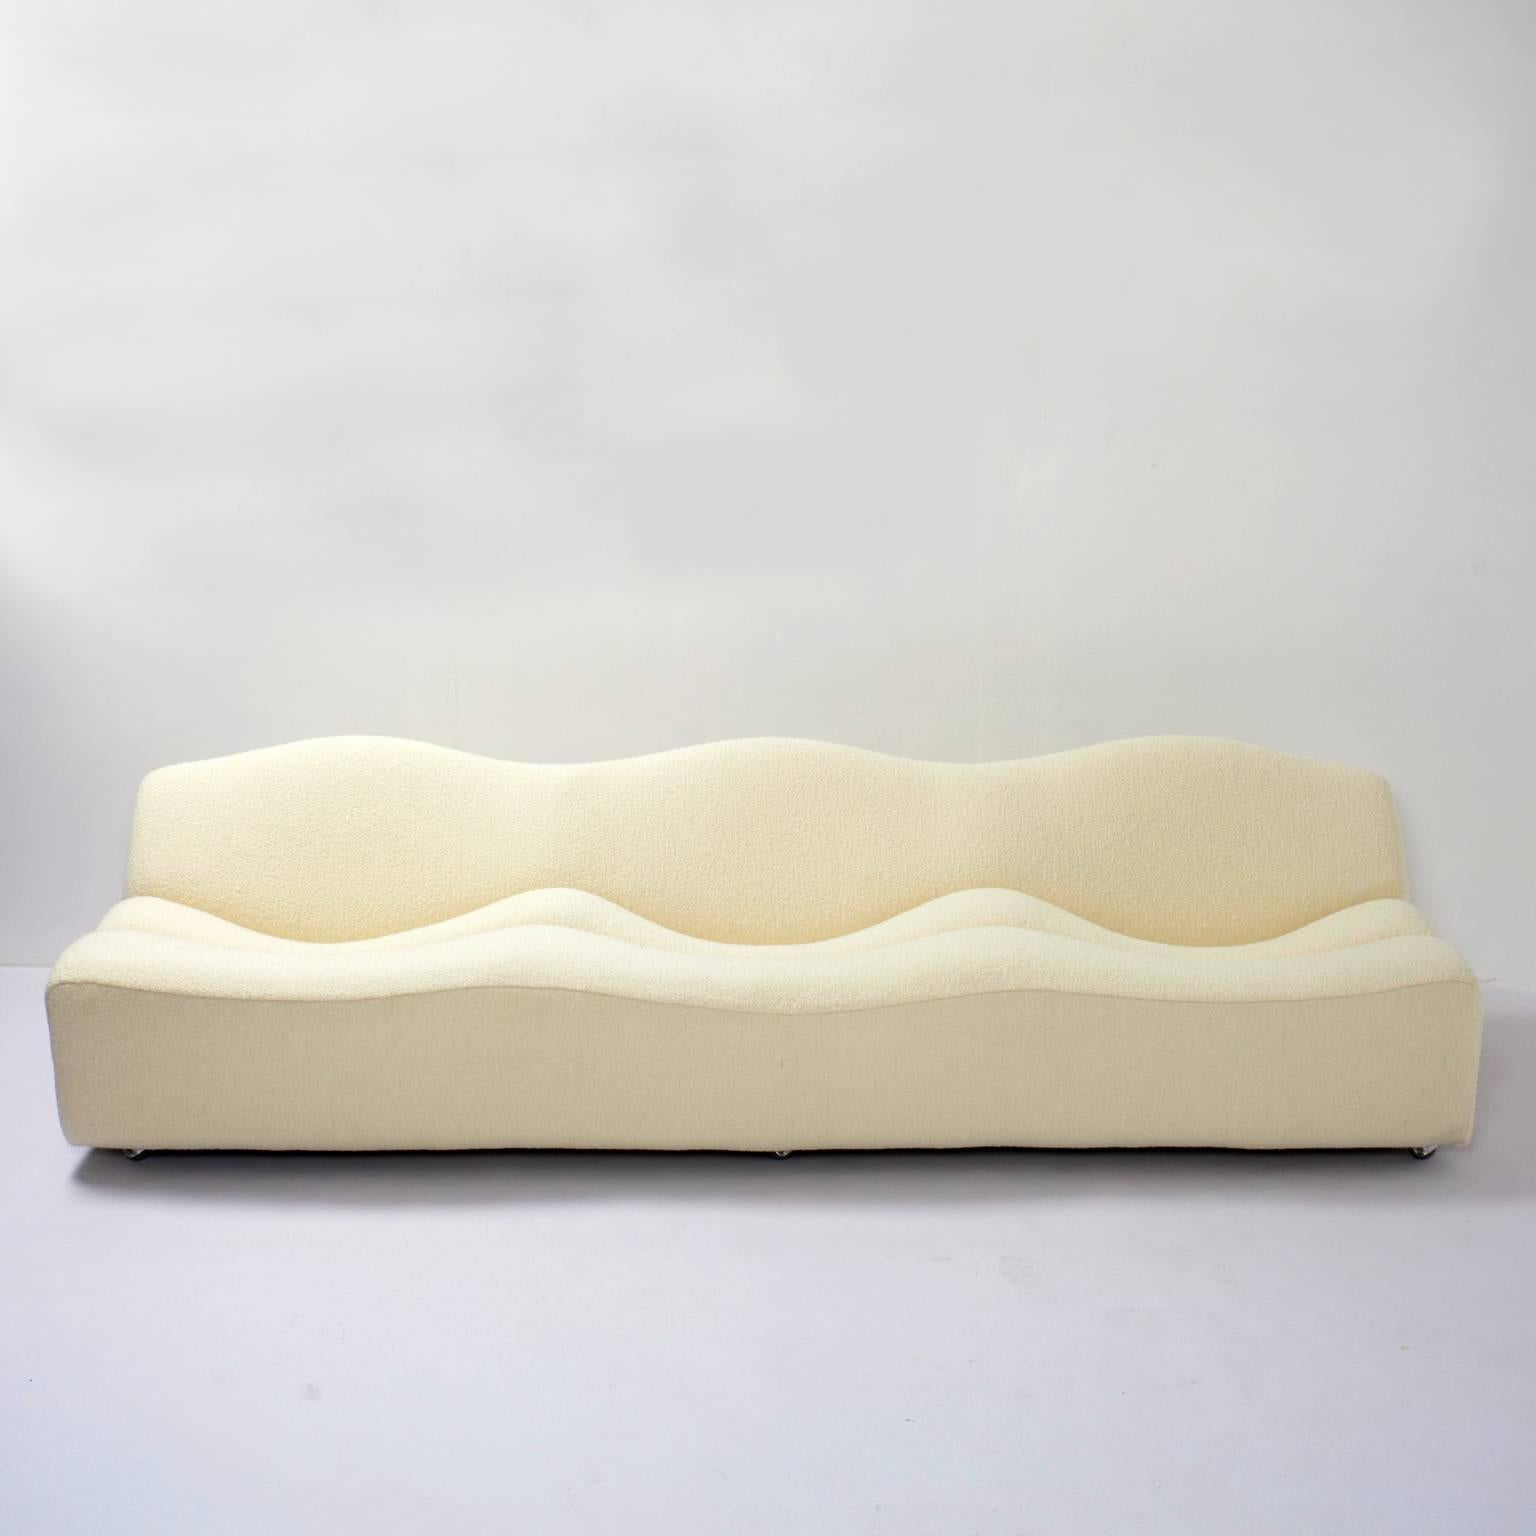 The ABCD three-seat sofa was created in 1968 by the French designer Pierre Paulin
and manufactured by Artifort.
Three-seat sofa on wheels, reupholstered with a wool fabric by Pierre Frey.
Ivory color.